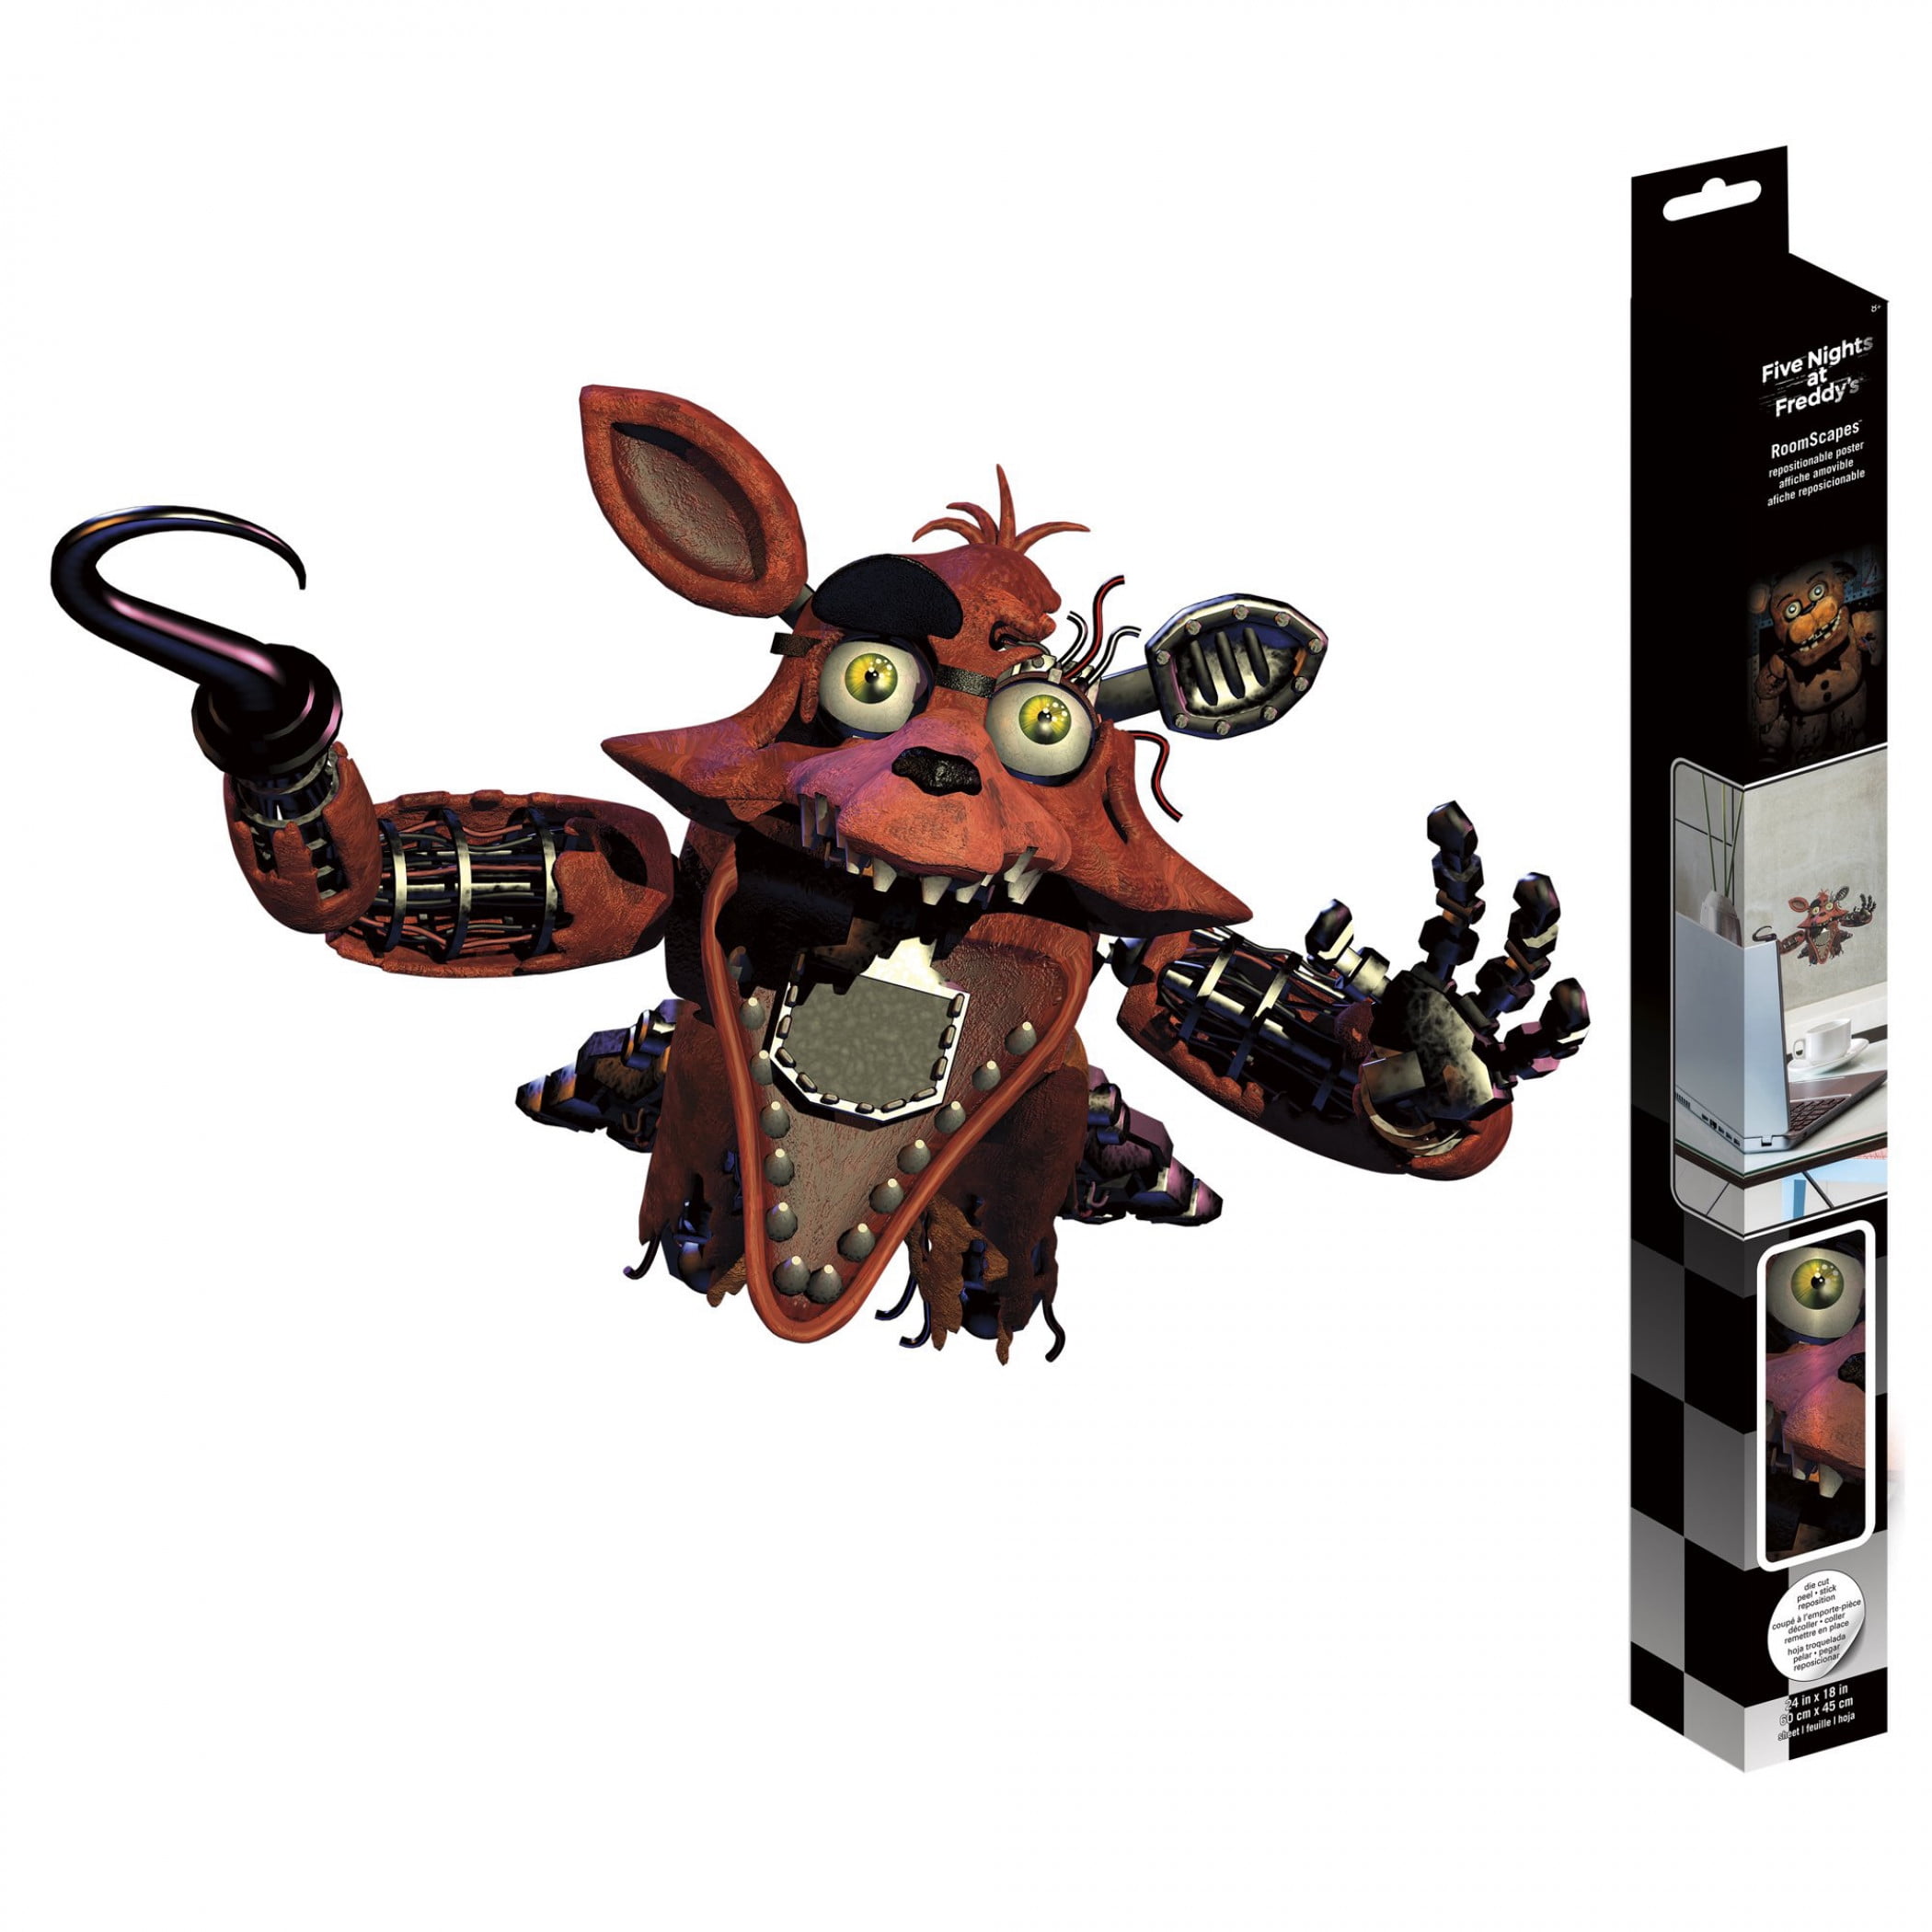 My withered foxy jumpscare